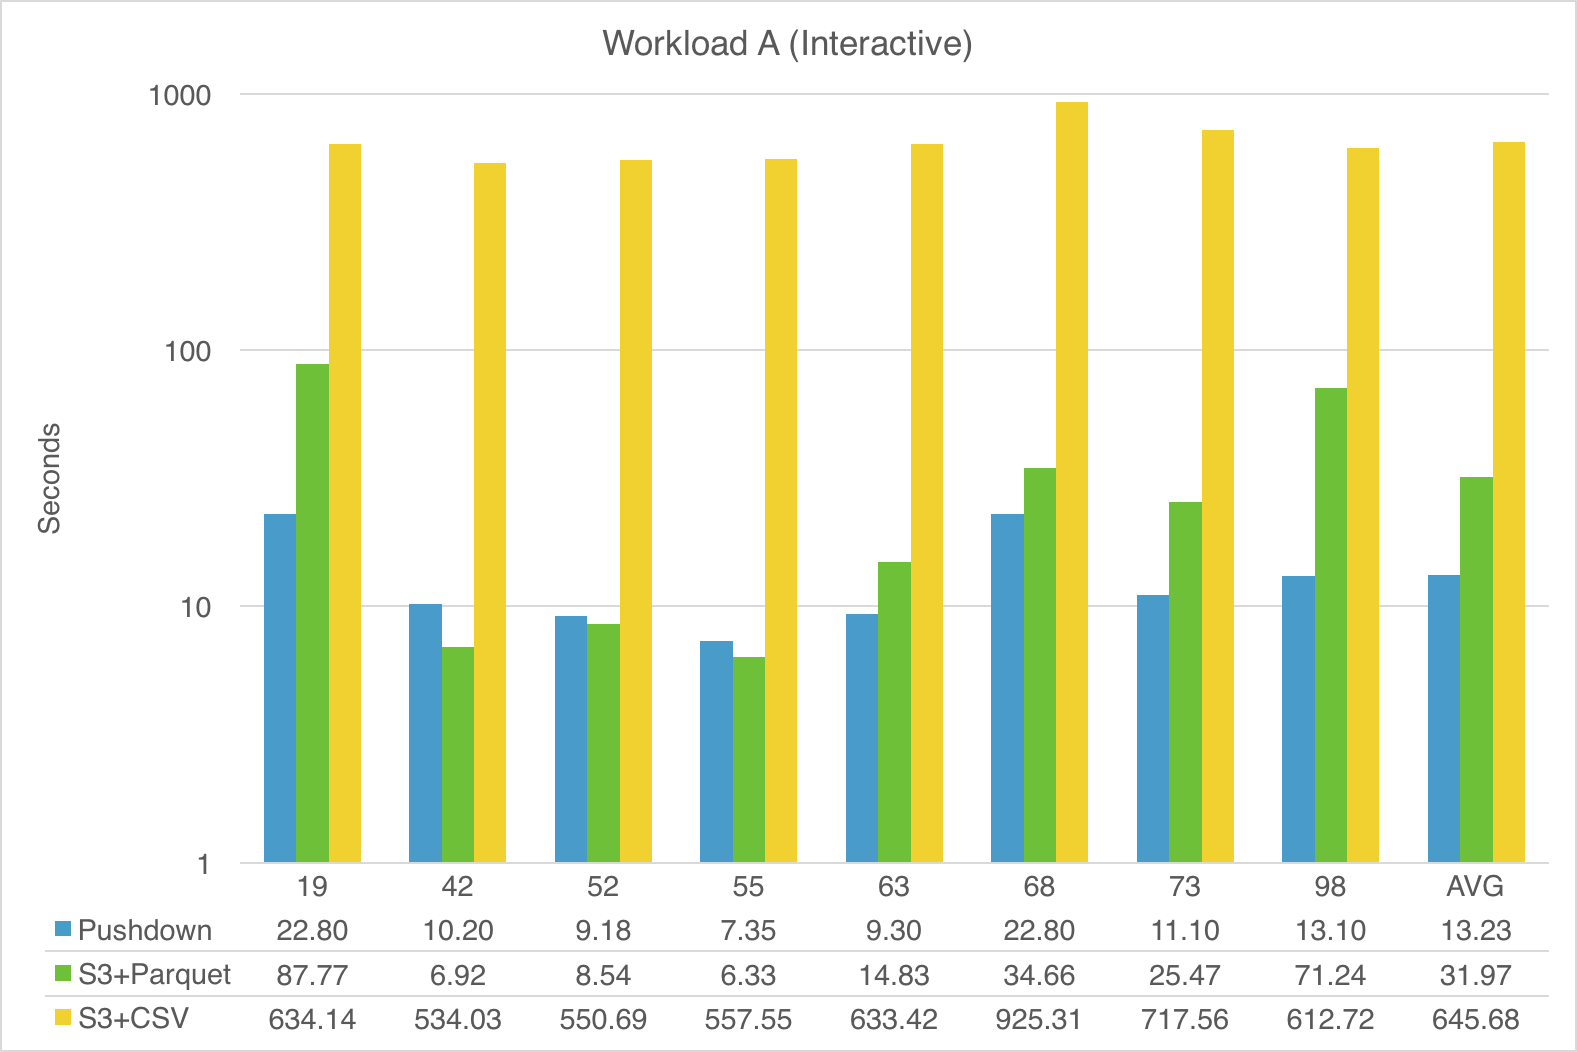 Performance comparison between queries in Workload A with pushdown vs no pushdown